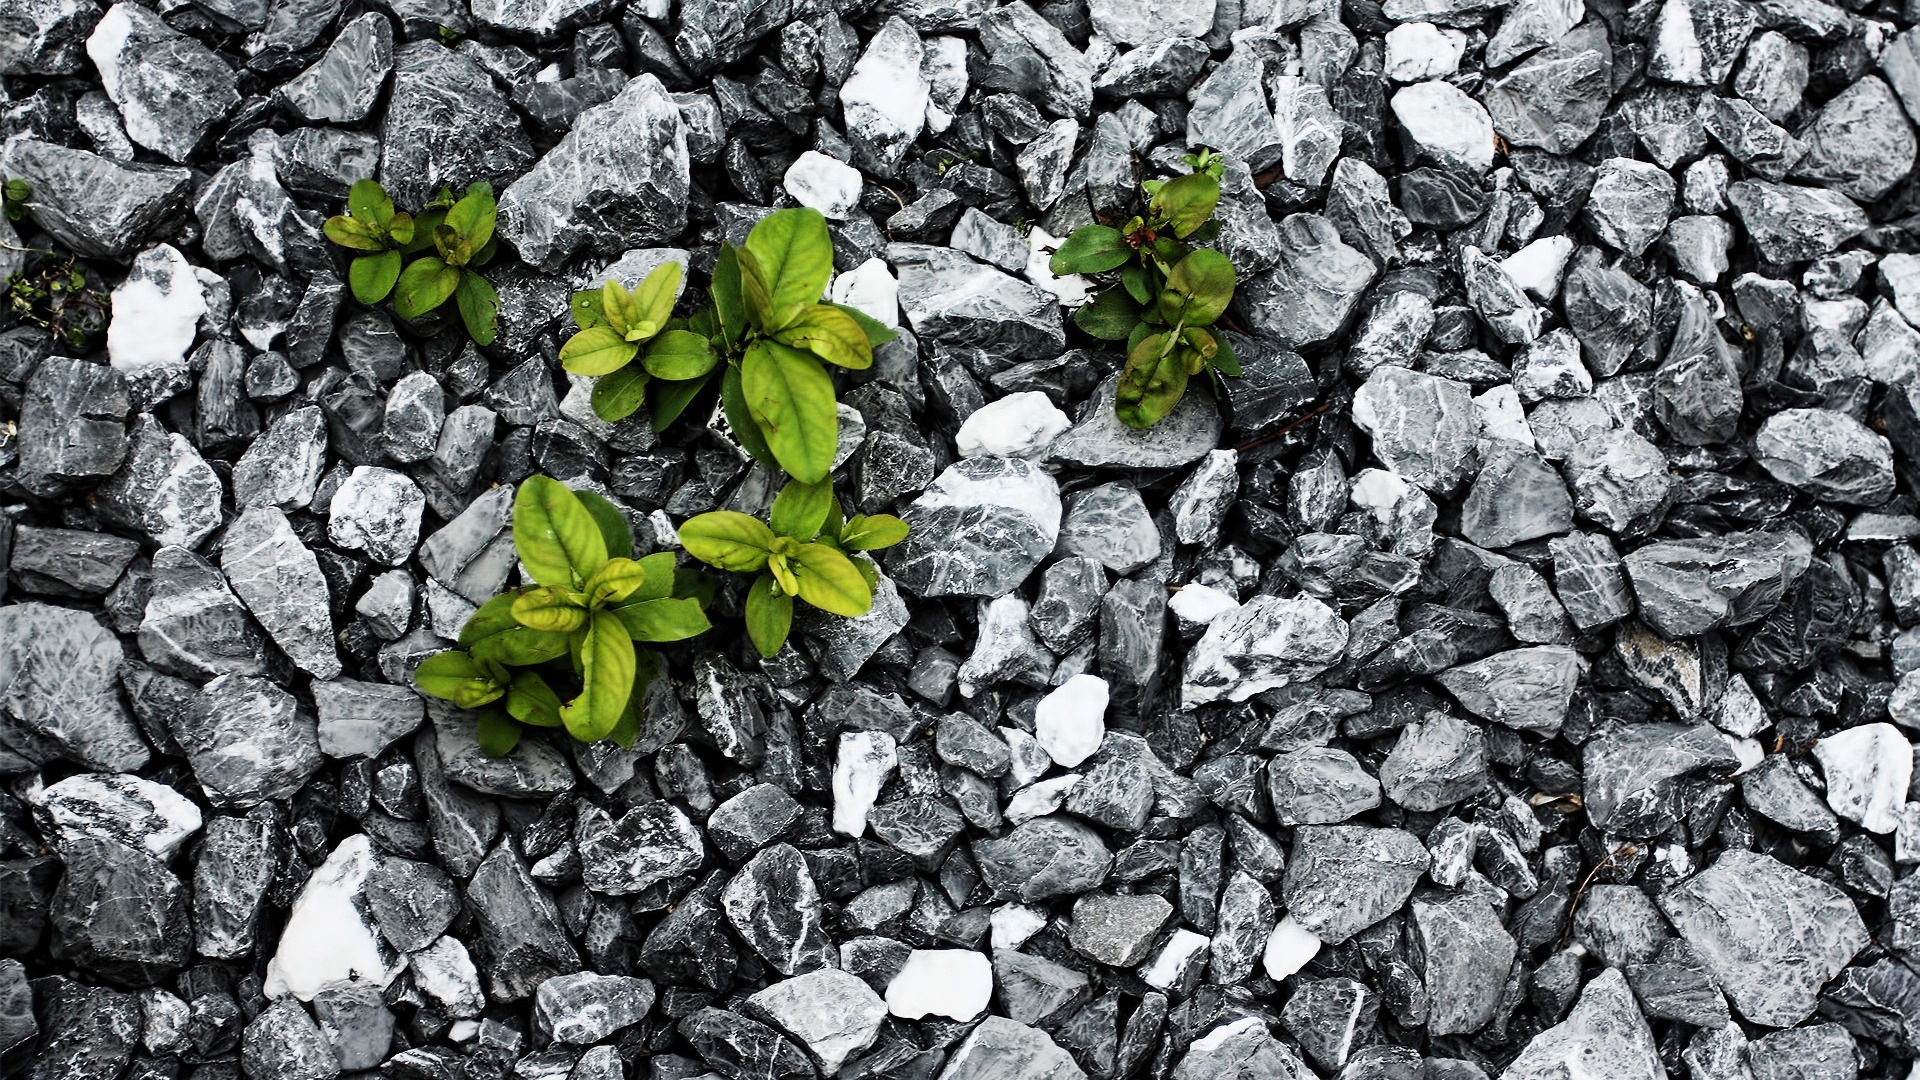 Plants between the stones for 1920 x 1080 HDTV 1080p resolution